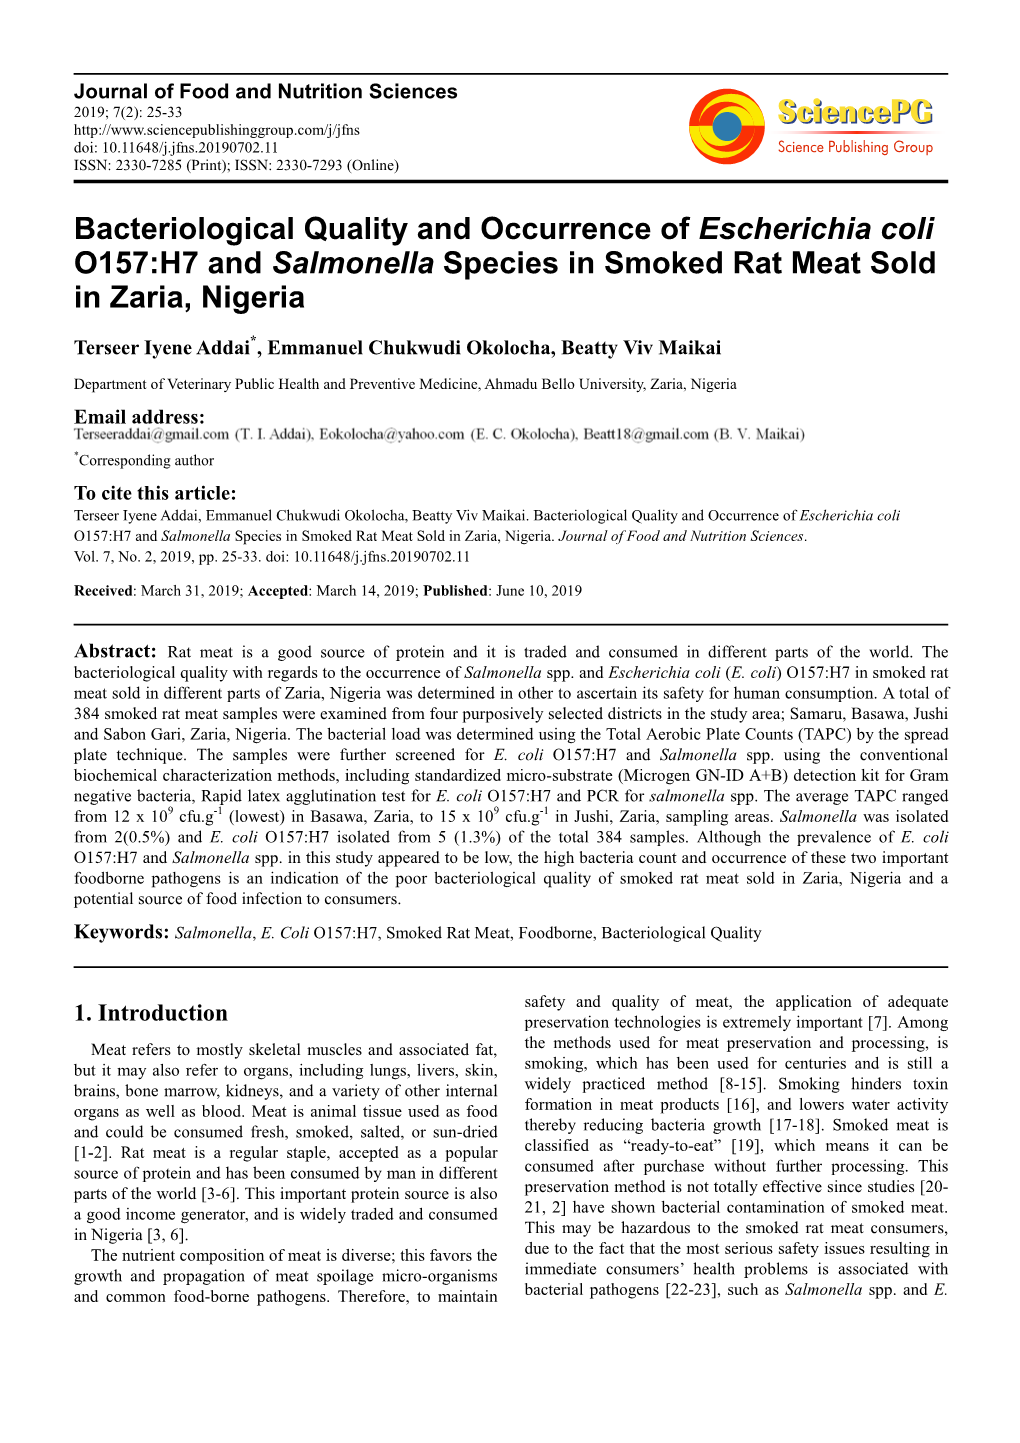 Bacteriological Quality and Occurrence of Escherichia Coli O157:H7 and Salmonella Species in Smoked Rat Meat Sold in Zaria, Nigeria